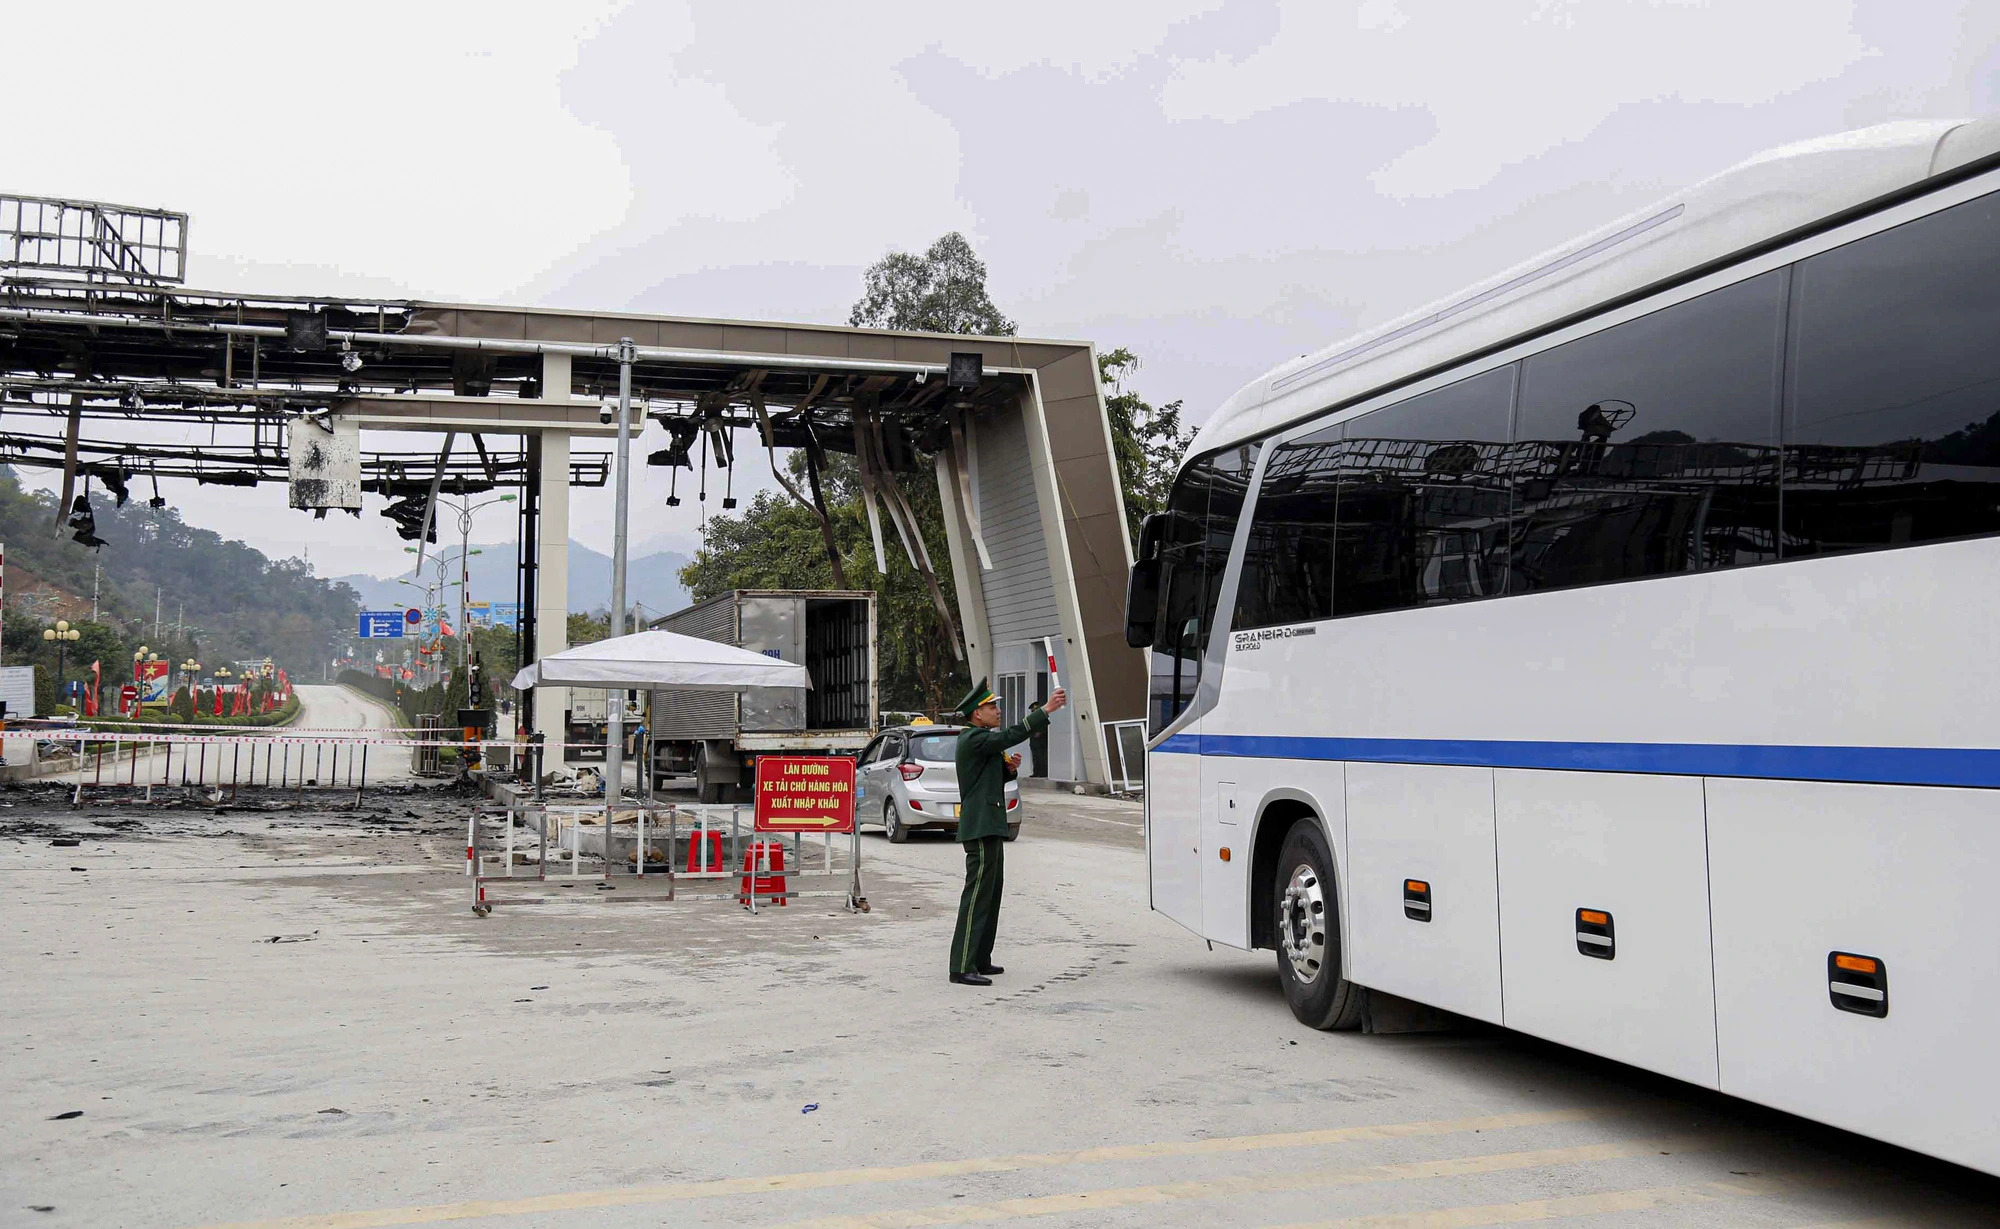 LED light failure likely cause of fire at int’l border gate in northern Vietnam